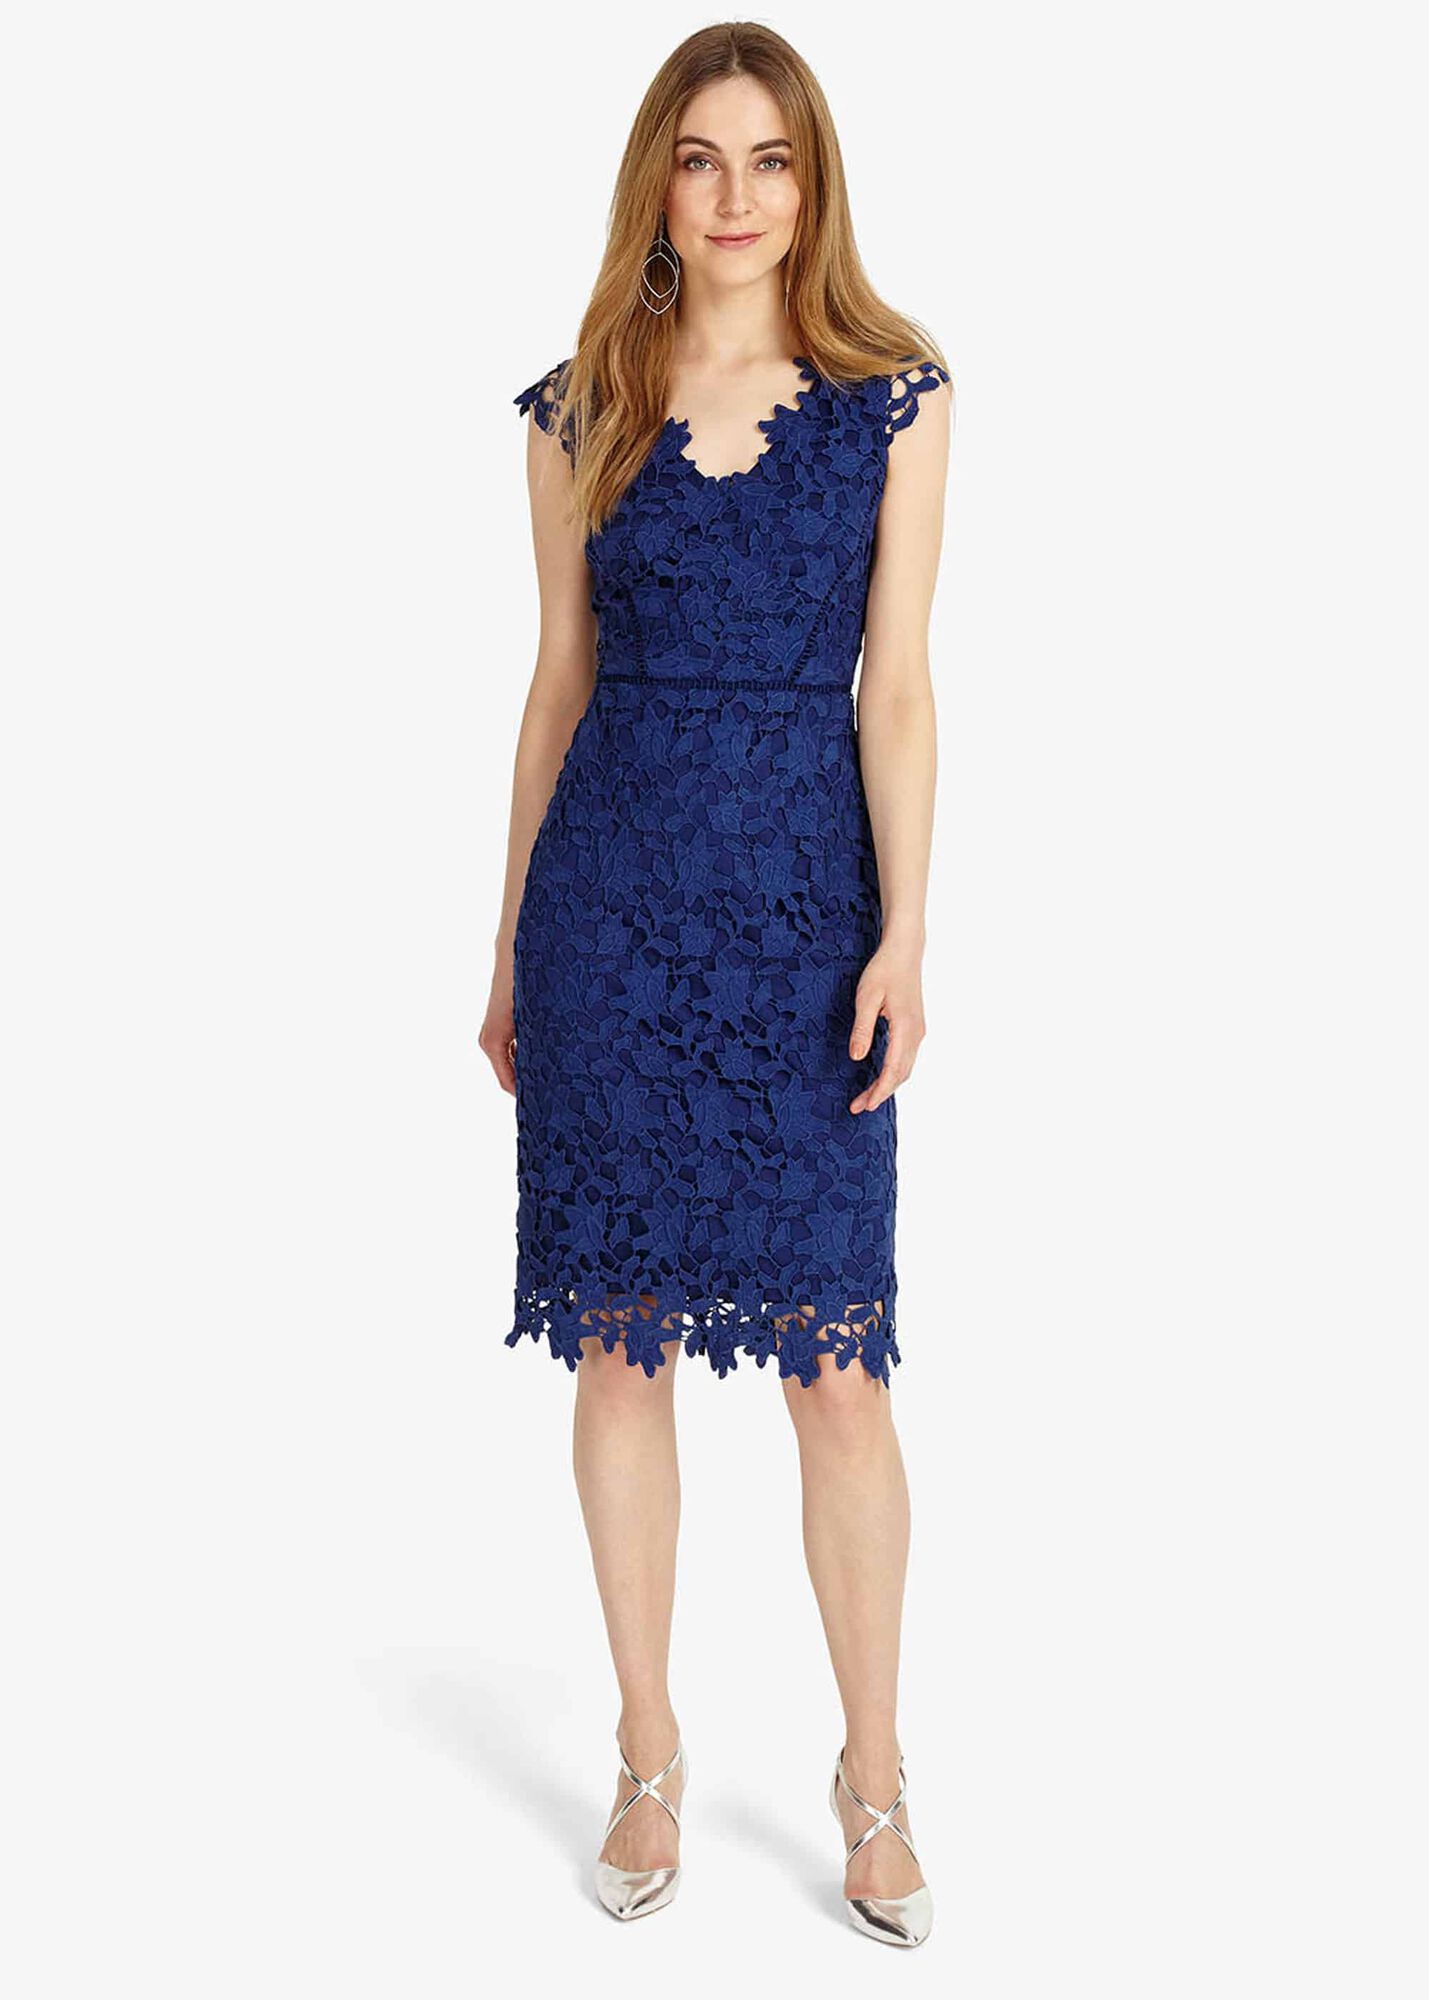 Petals Lace Dress | Phase Eight | Phase Eight